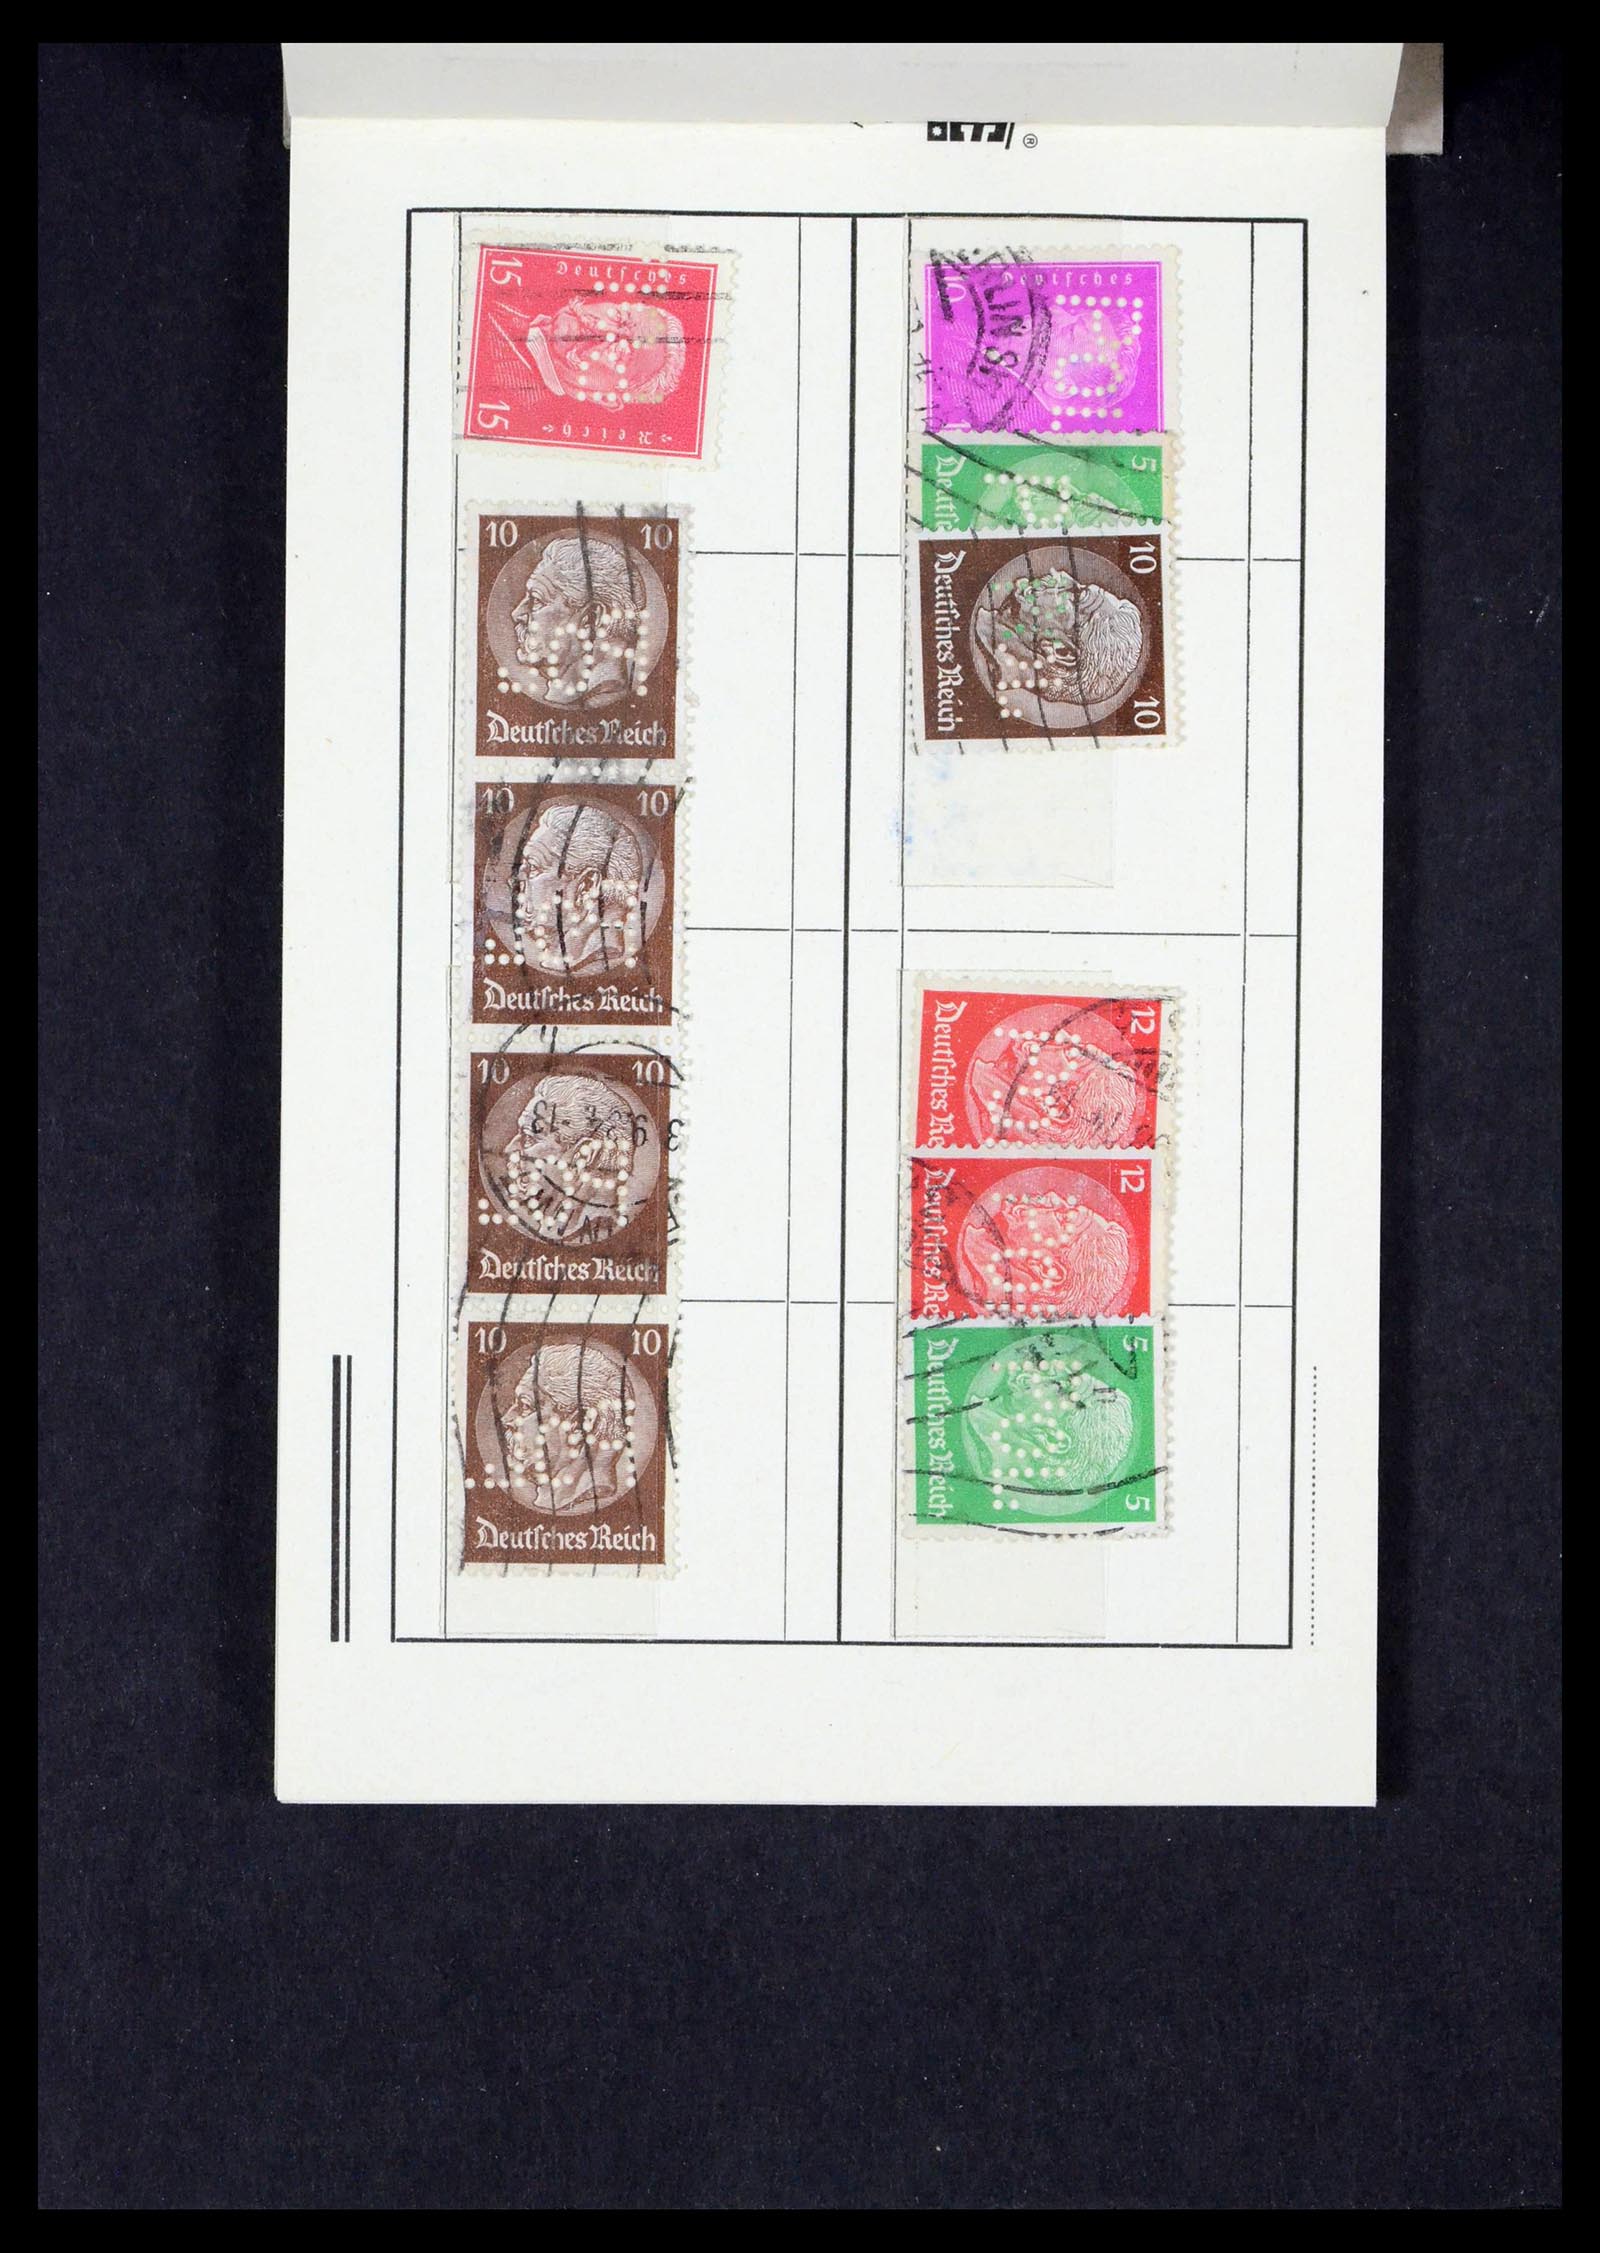 39458 0018 - Stamp collection 39458 Germany POL lochungen 1926-1955.